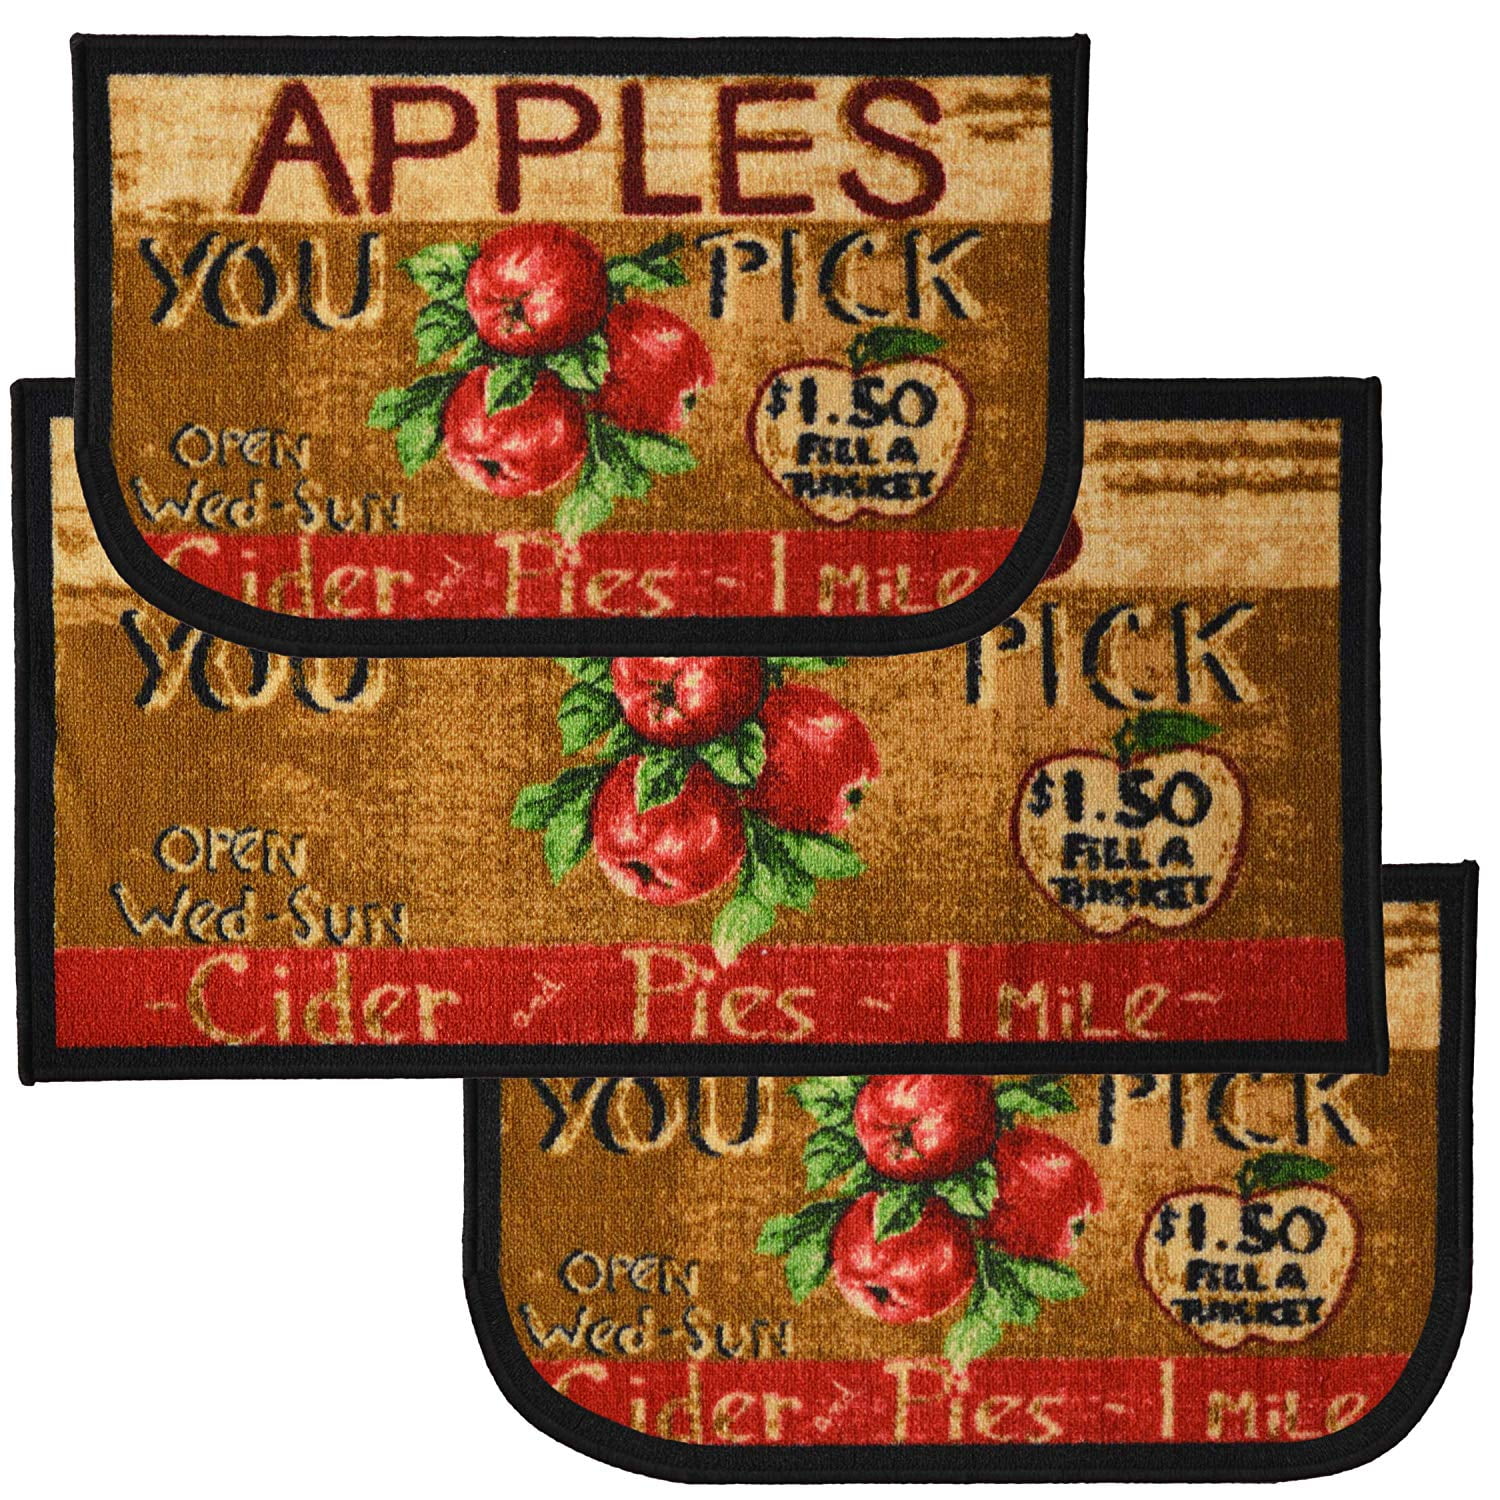 18" x 30" KH FRUITS IN SQUARES SET OF 2 PRINTED KITCHEN RUGS 20" x 40" & 